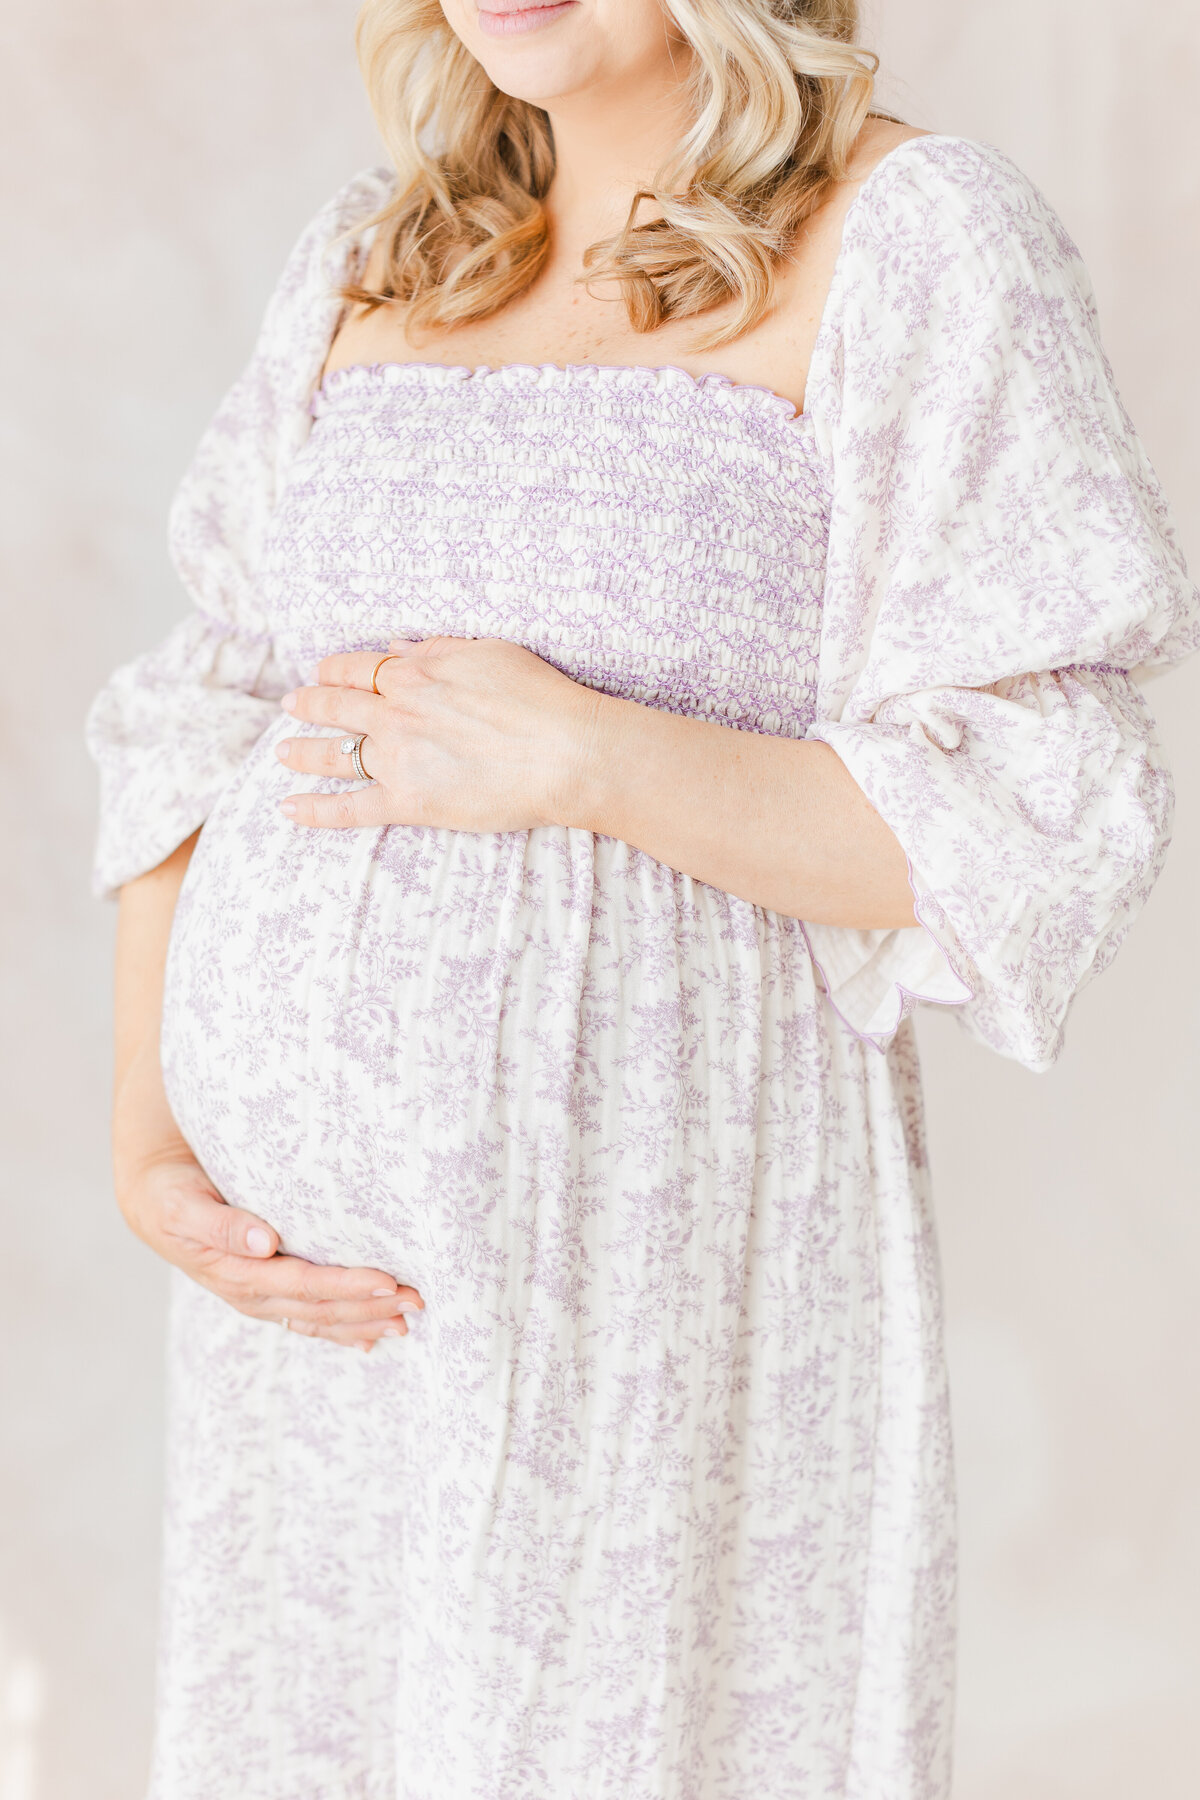 A photo of a pregnant mother holding her belly in front of a hand-painted canvas backdrop by DC Maternity Photographer